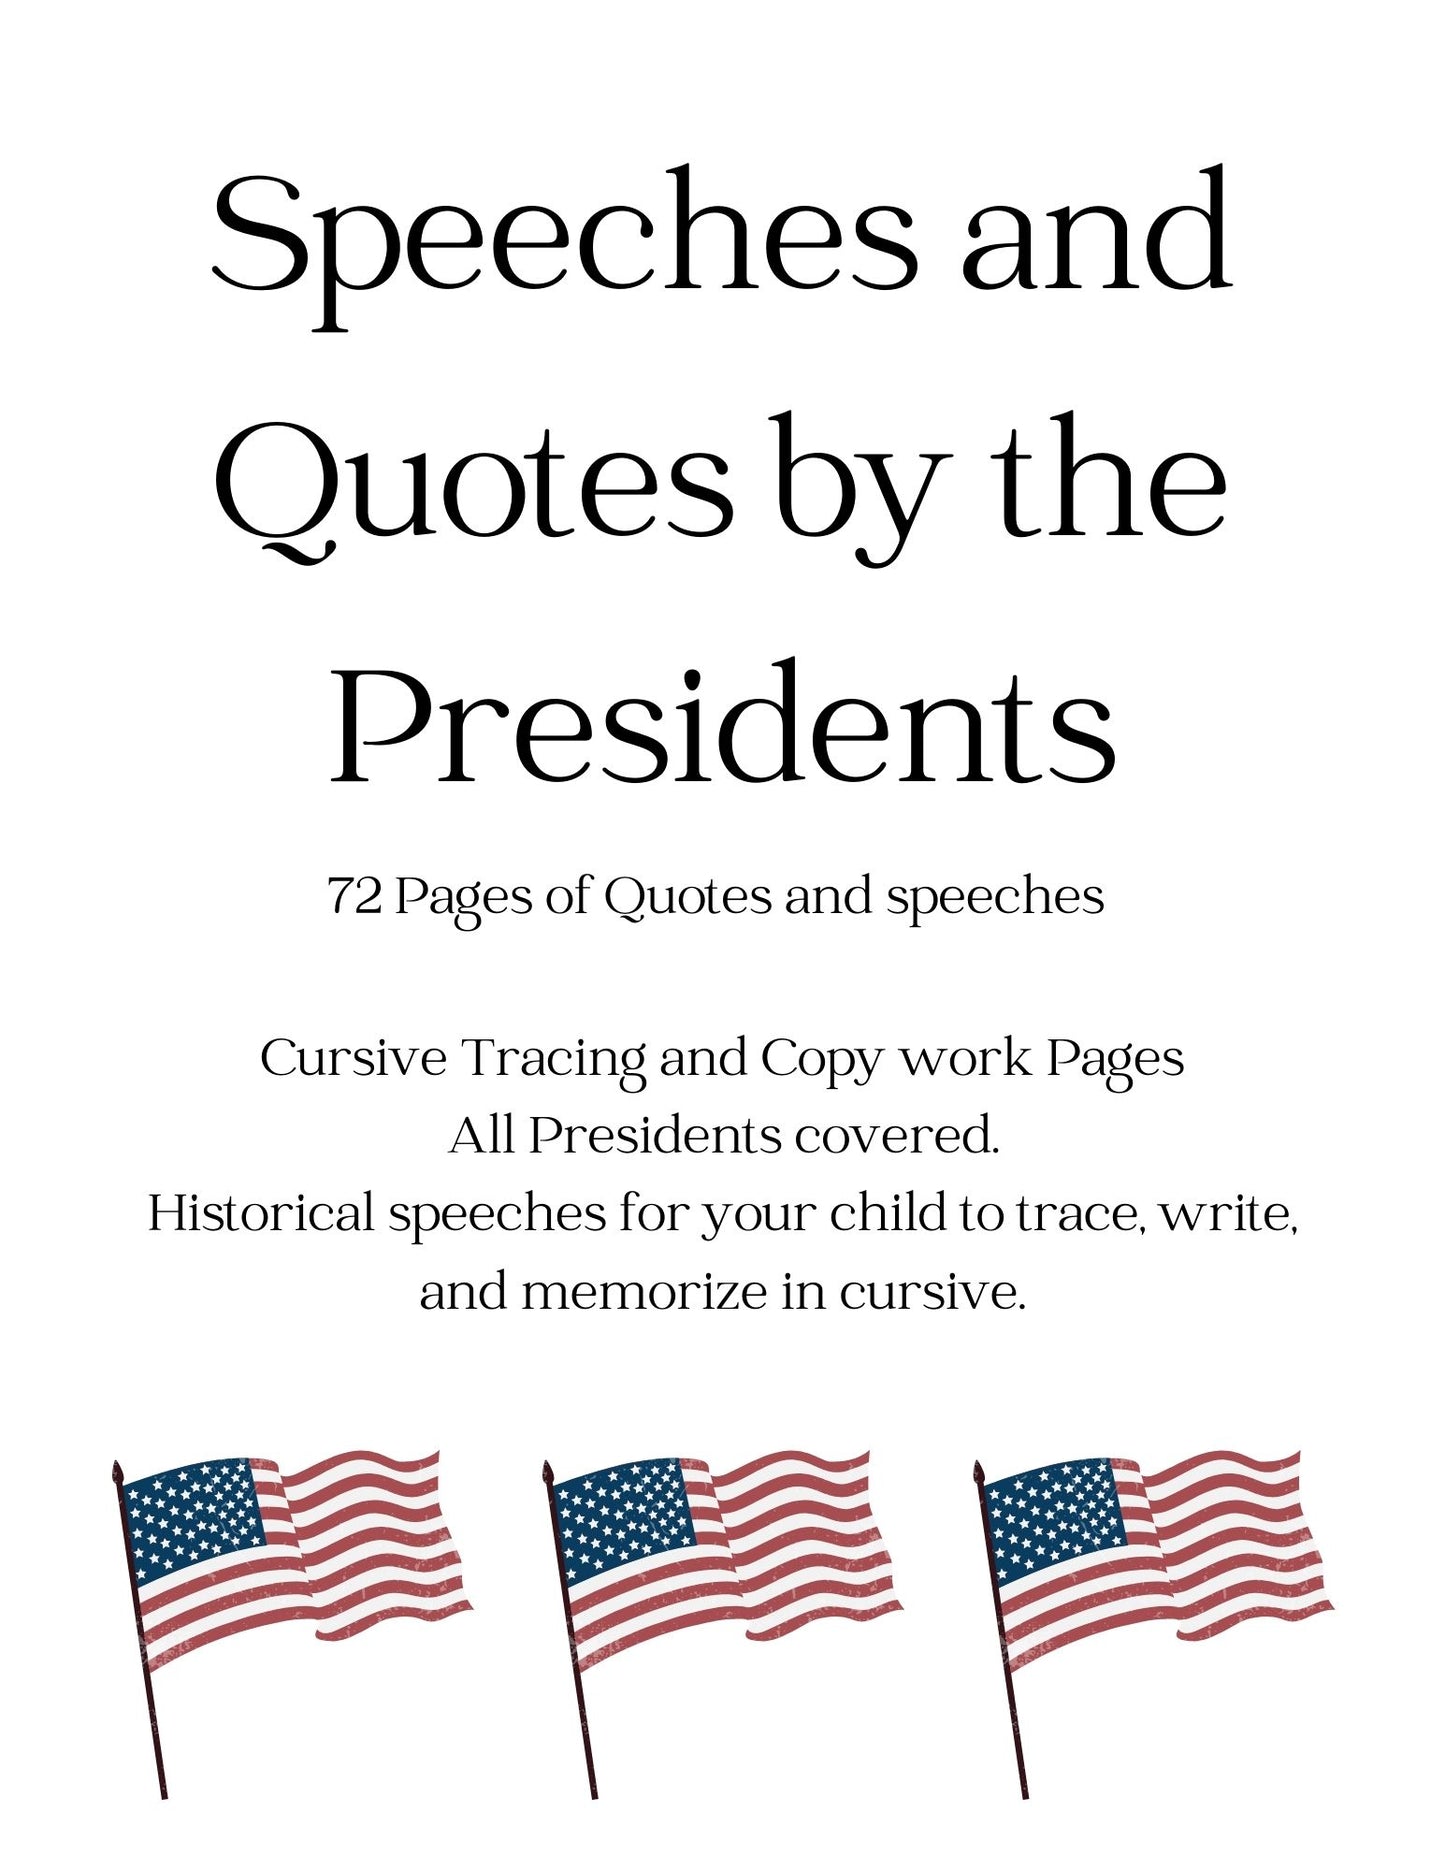 US President Quotes and Speeches Workbook for Upper Elementary to Middle School